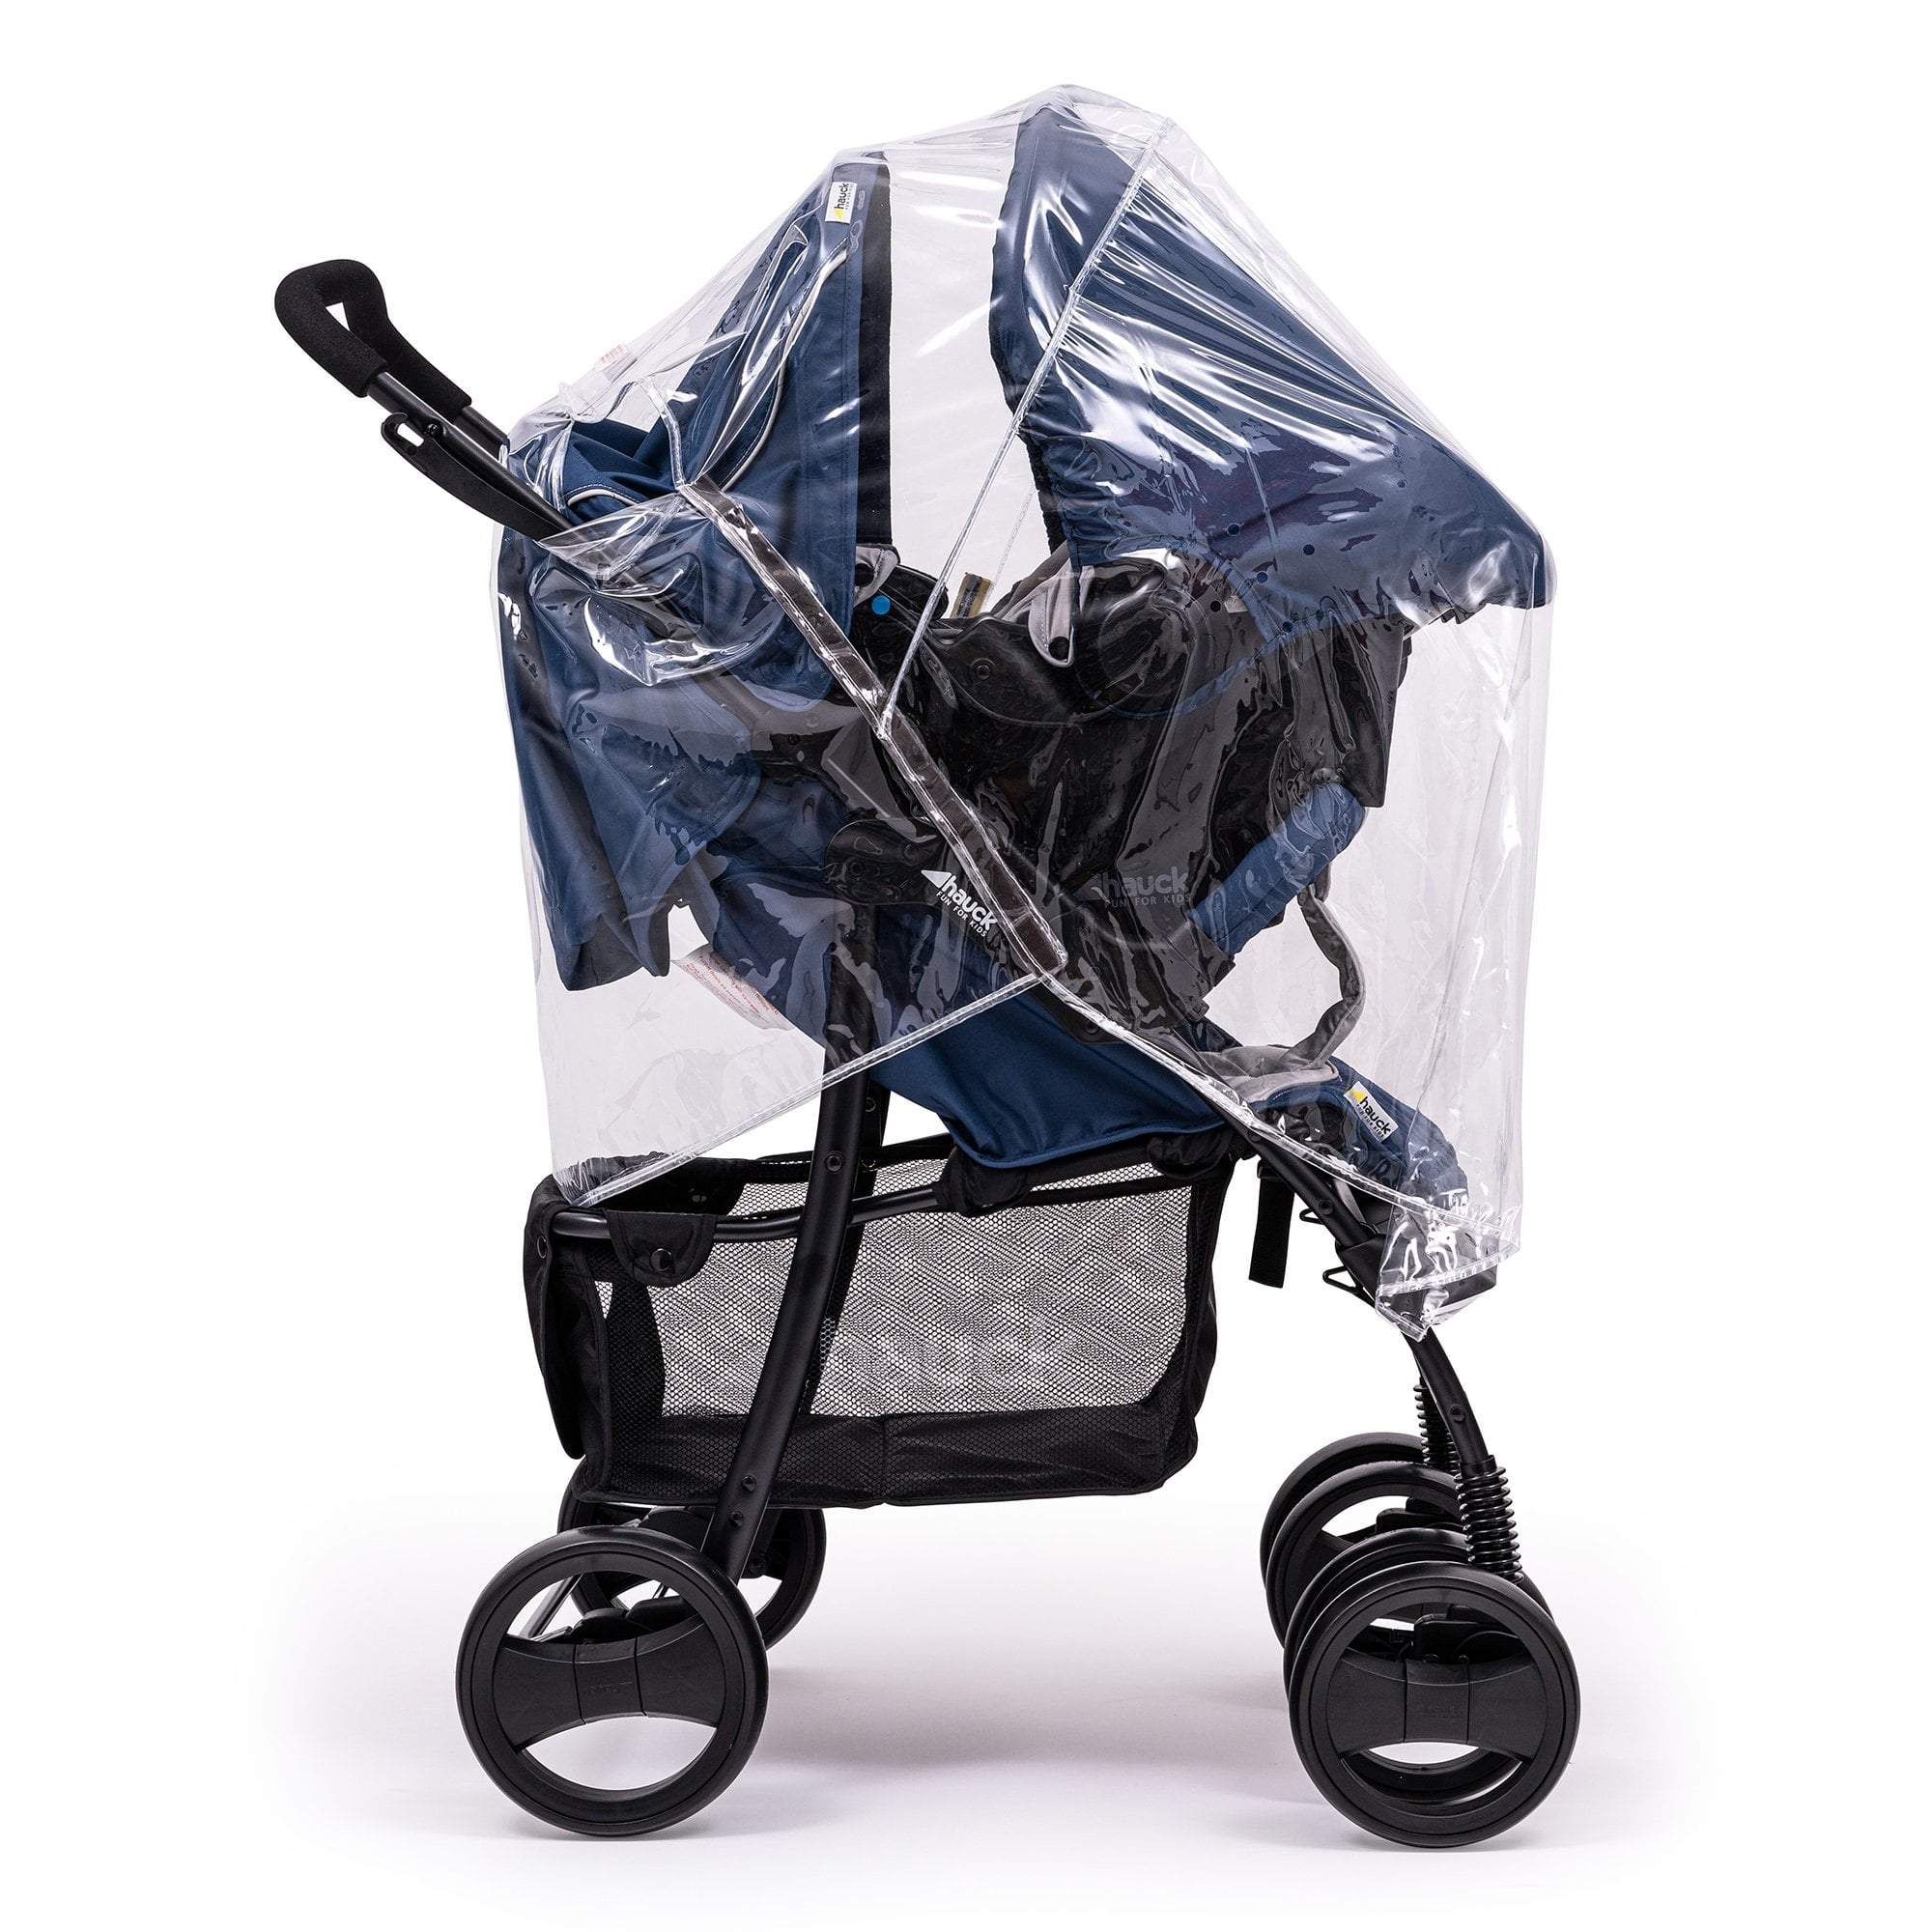 Travel System Raincover Compatible with Hartan - Fits All Models - For Your Little One